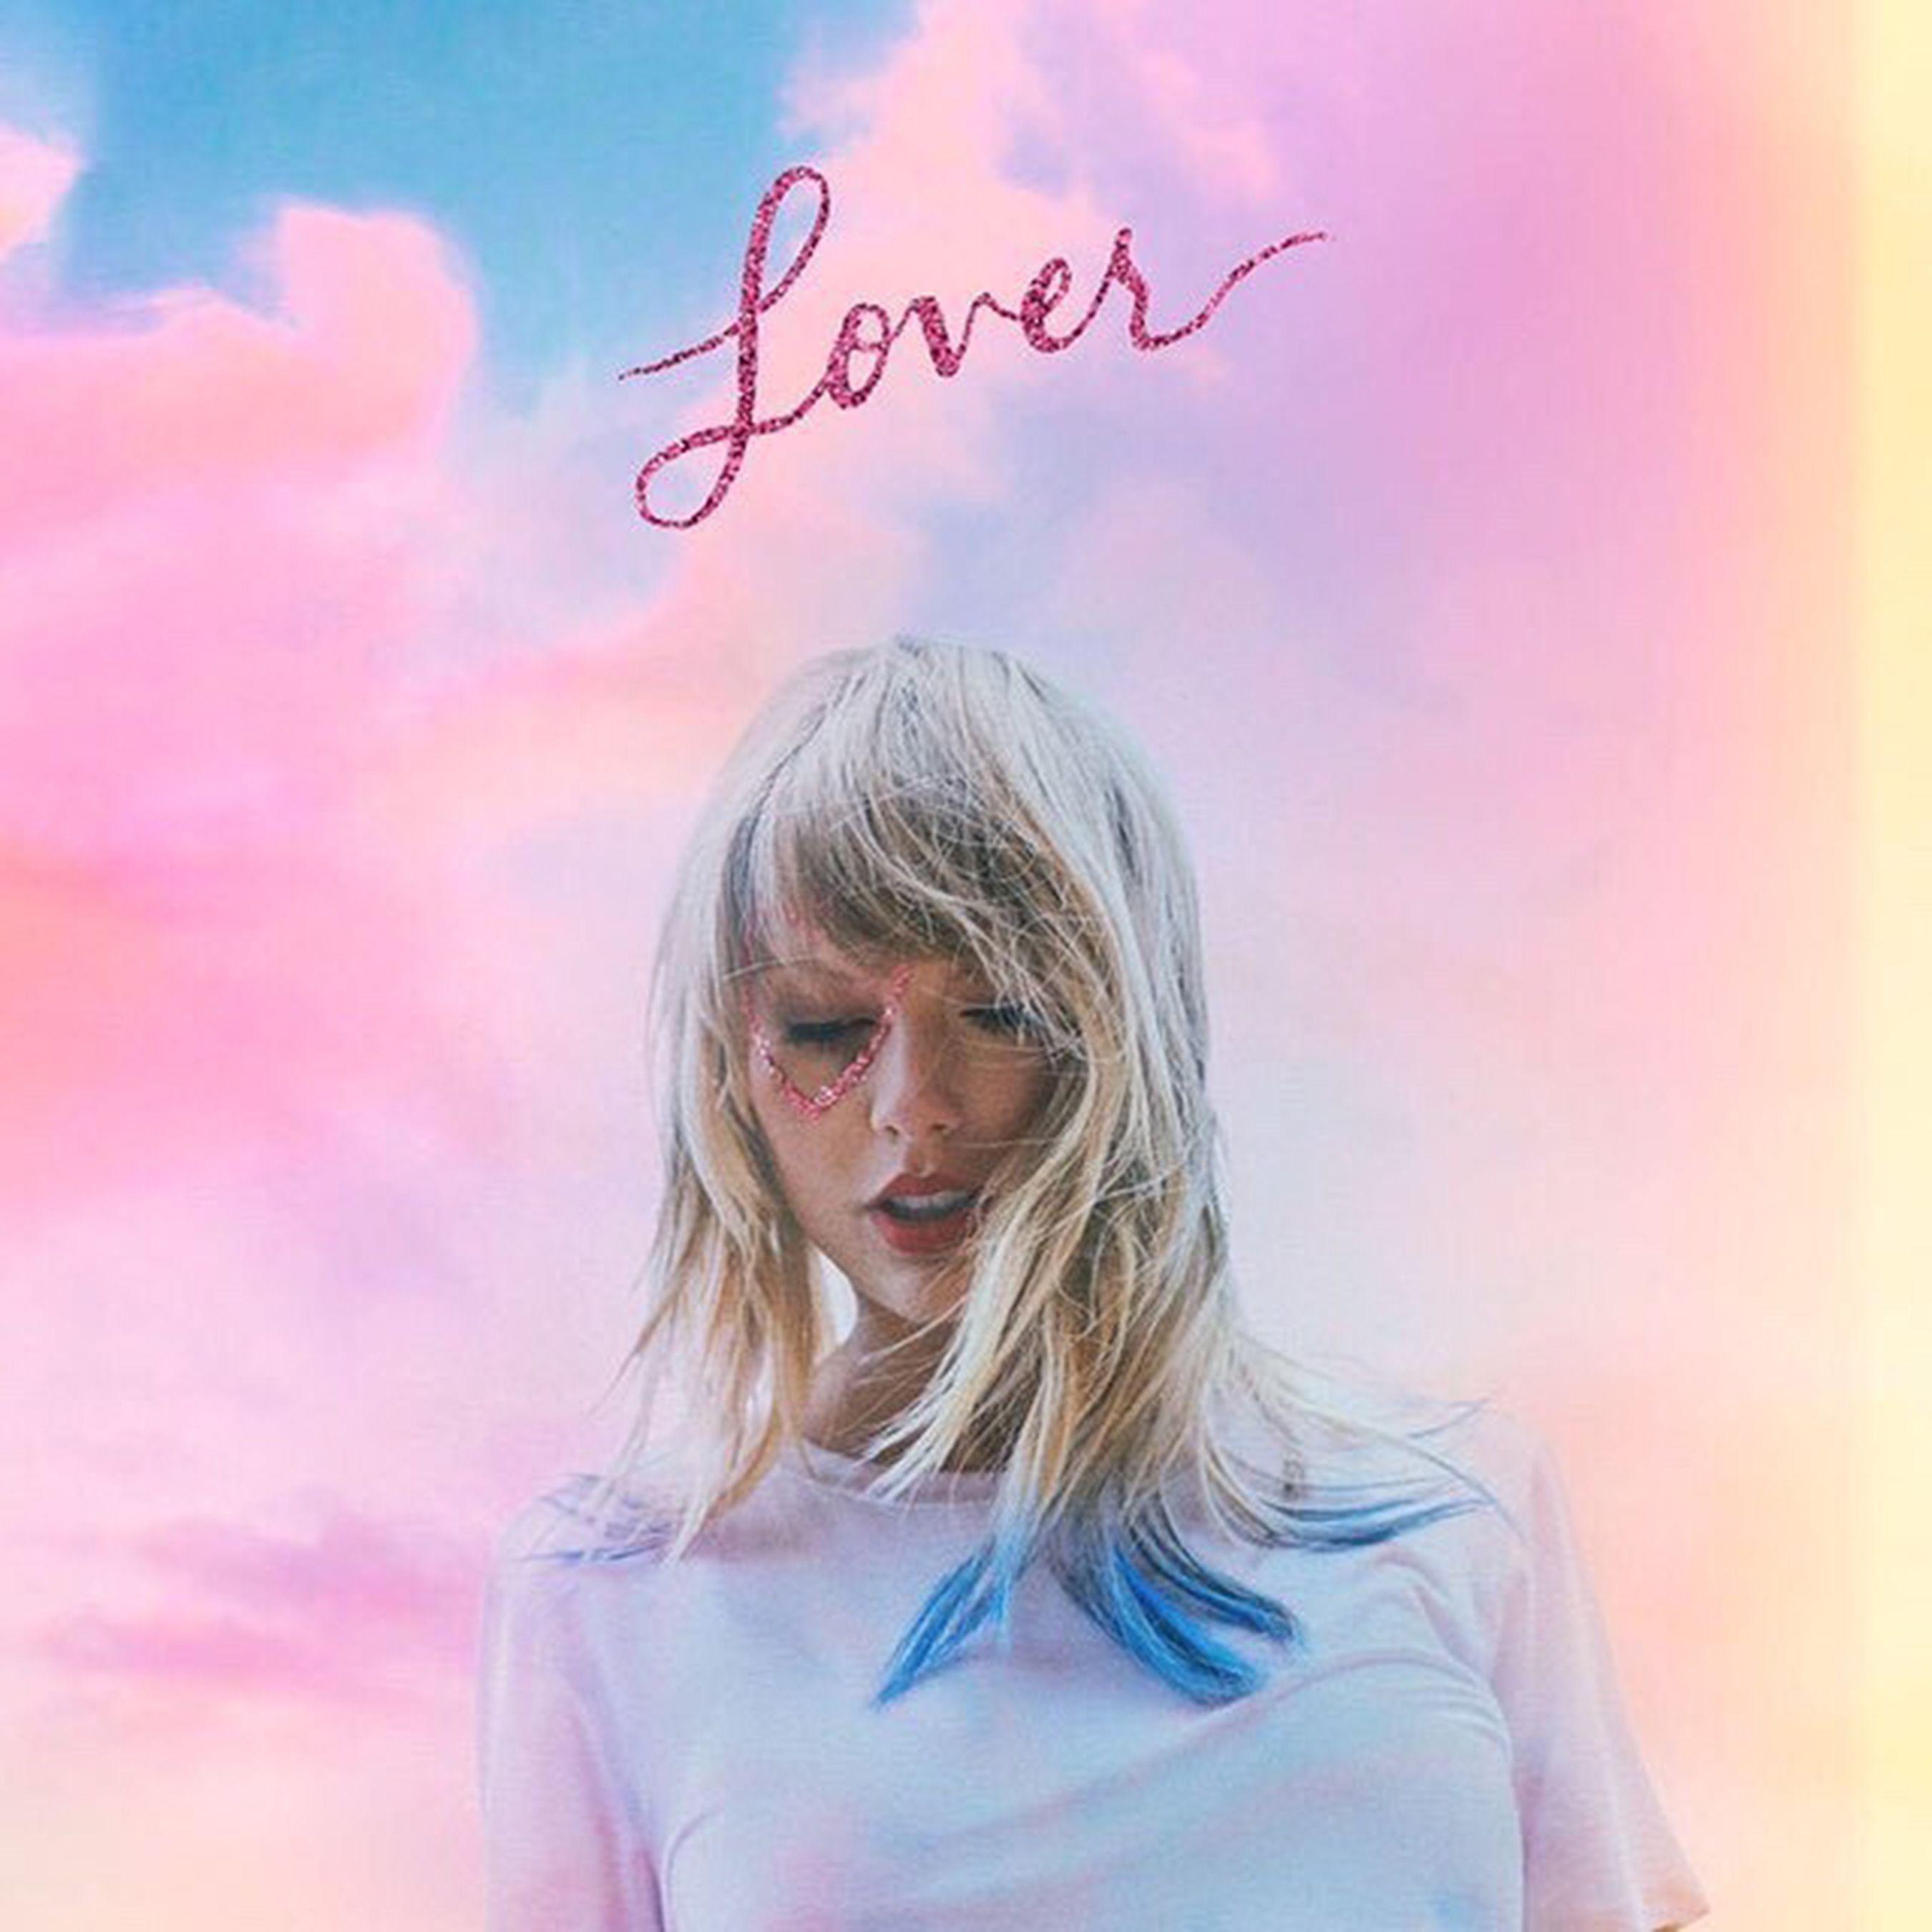 Taylor Swift's Lover album cover, with the singer in a white t-shirt in front of a pink and blue sky. - Taylor Swift